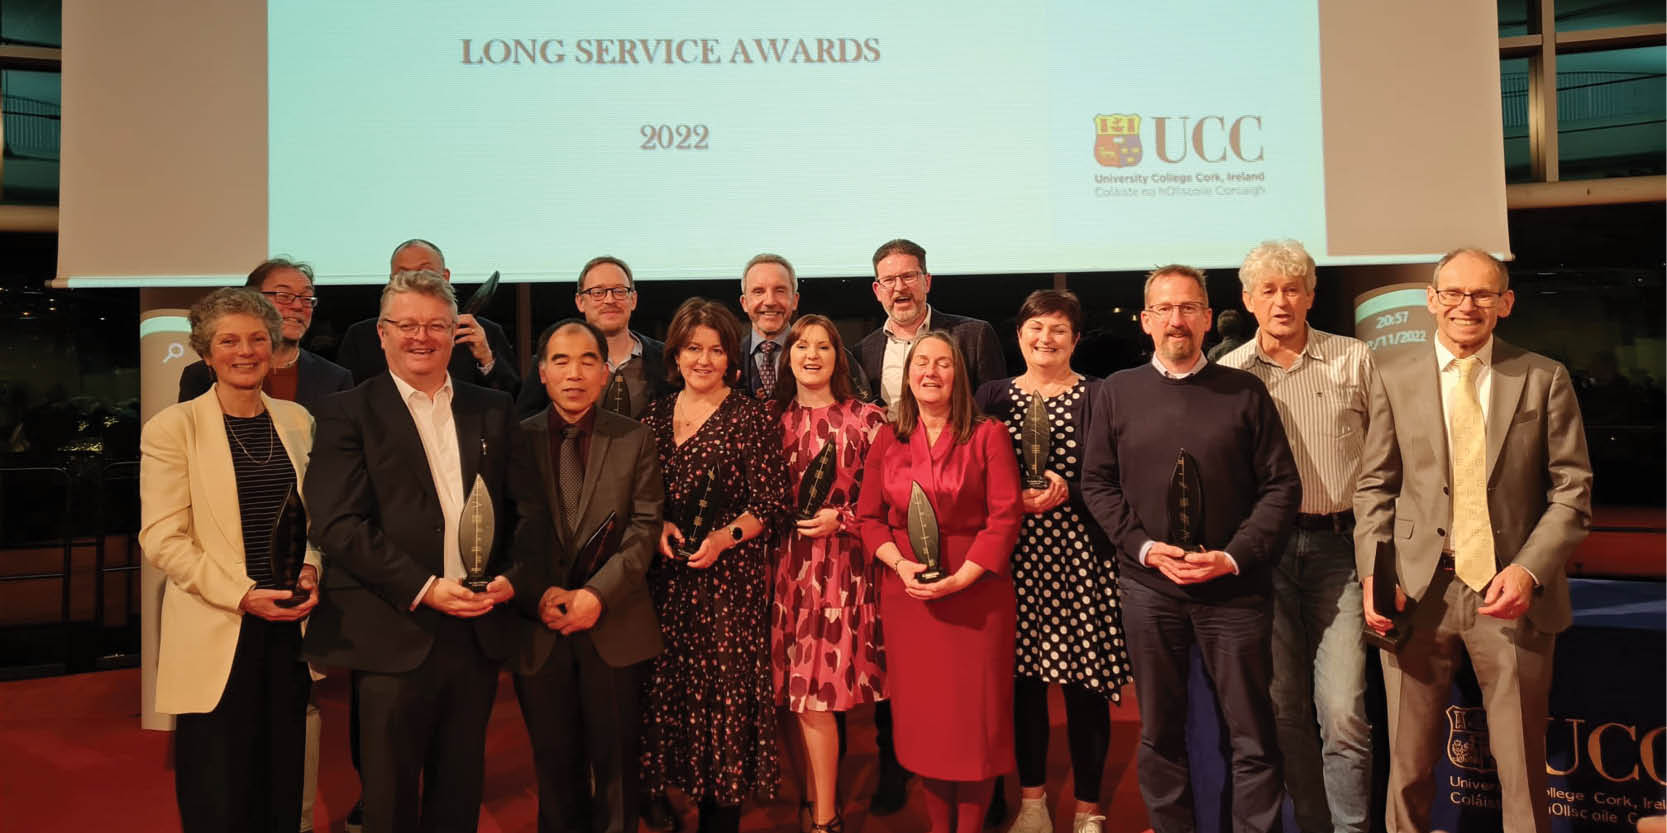 College of SEFS staff presented with Long Service Awards 